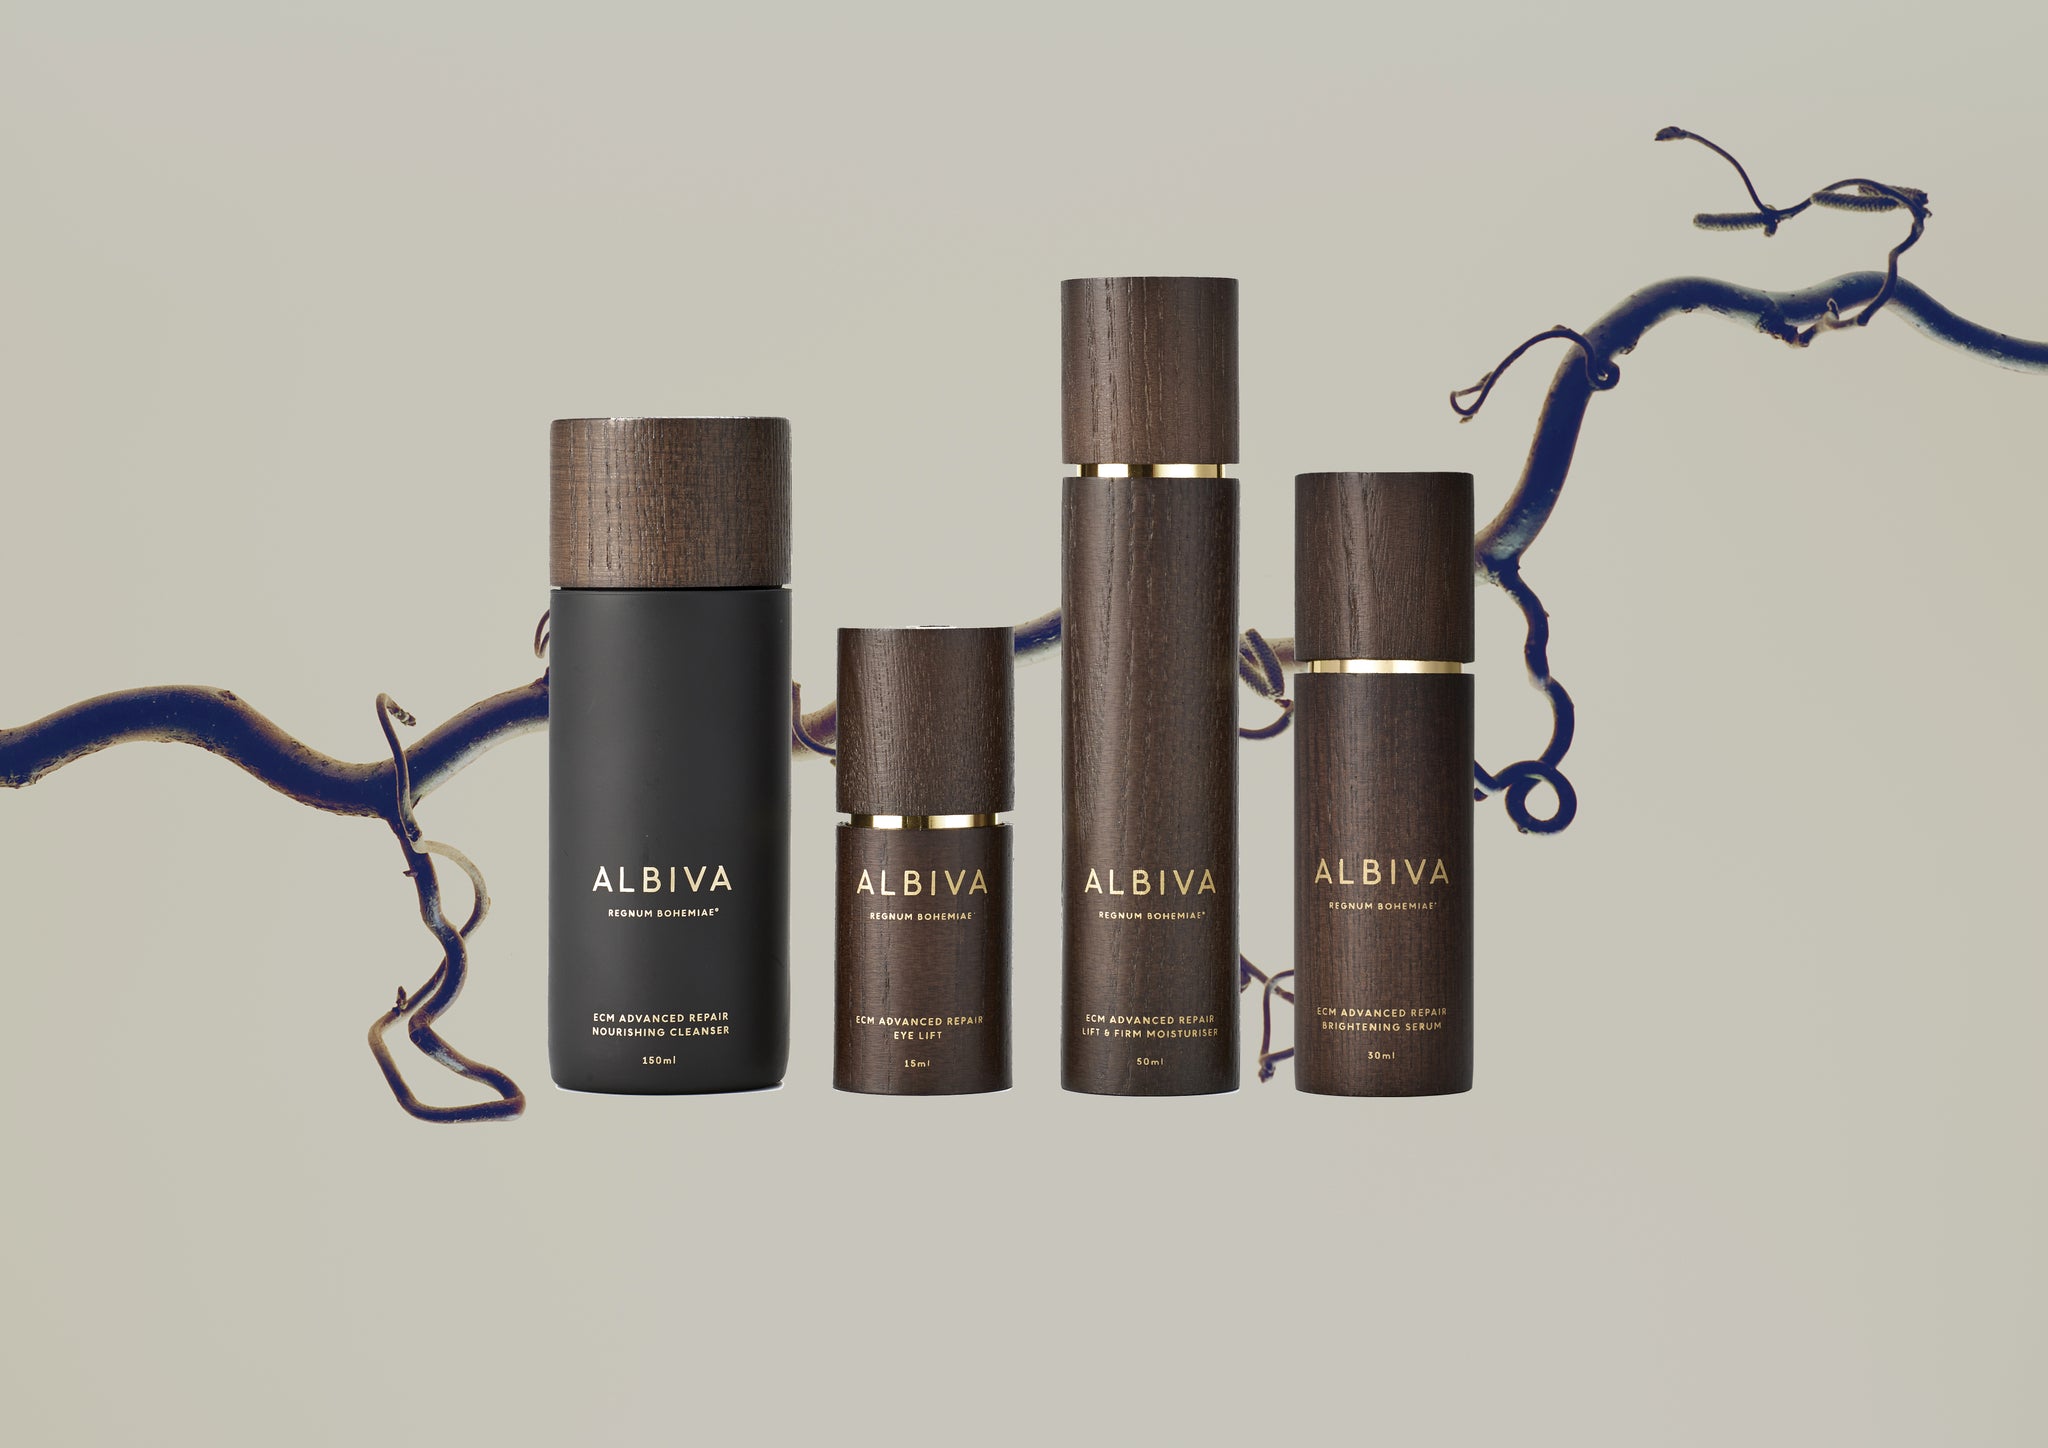 THE ART OF CARE - Give your skin the care and protection it deserves.